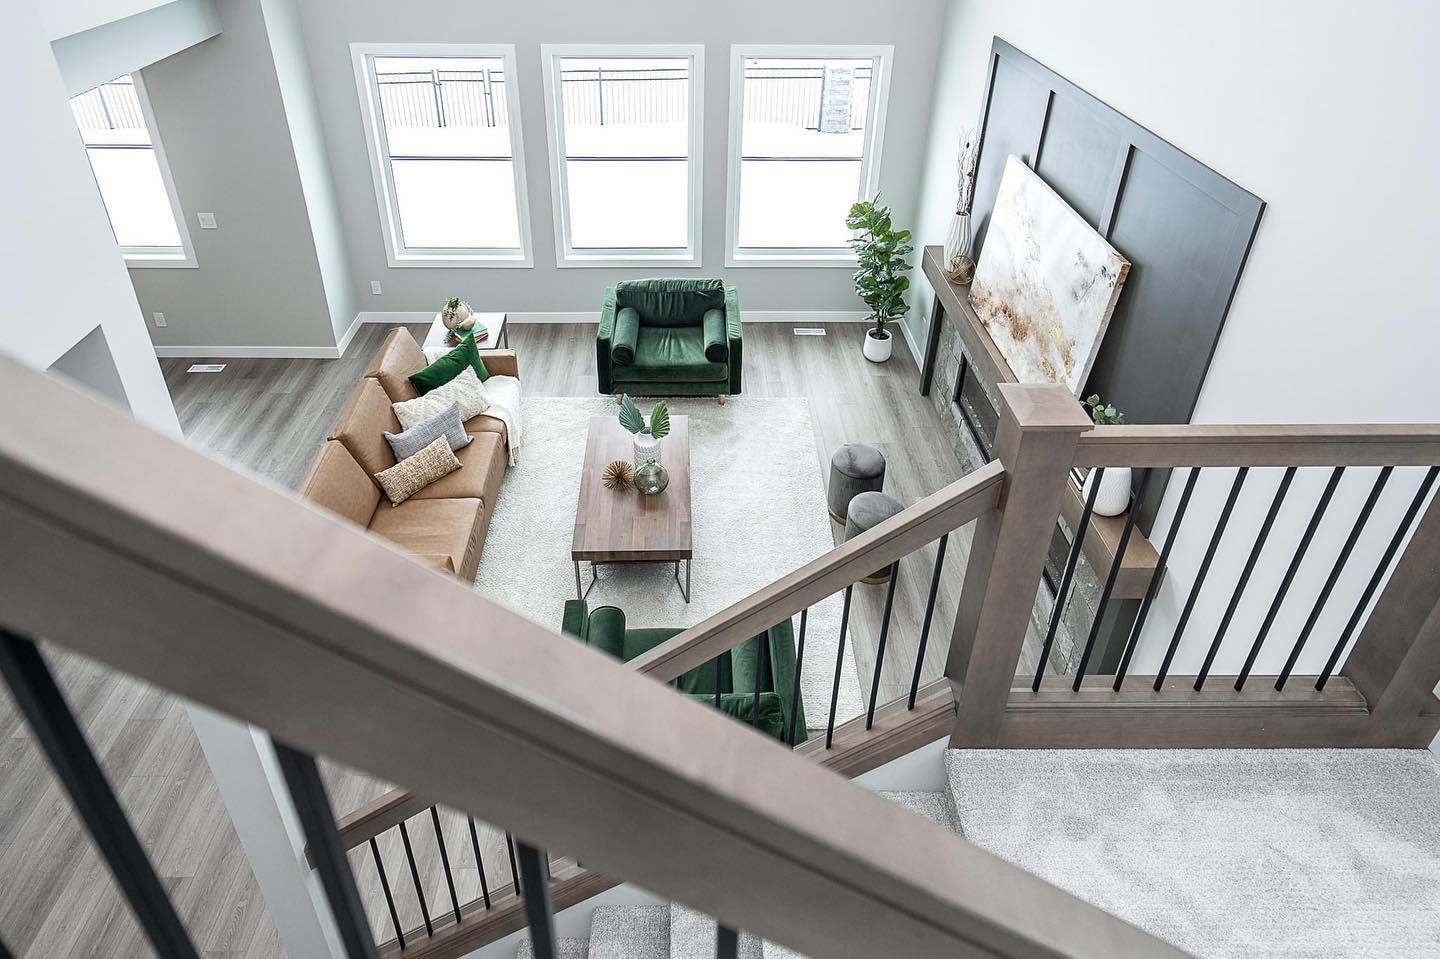 Talk about a view 😍

Our Burke home model offers an open-to-above great room which creates immense natural light in your home. 

📍 111 Valley Brook Road, Bridgwater Trails 
Immediate possession available!
https://www.foxridgehomeswpg.com/homes/111-valley-brook-road/